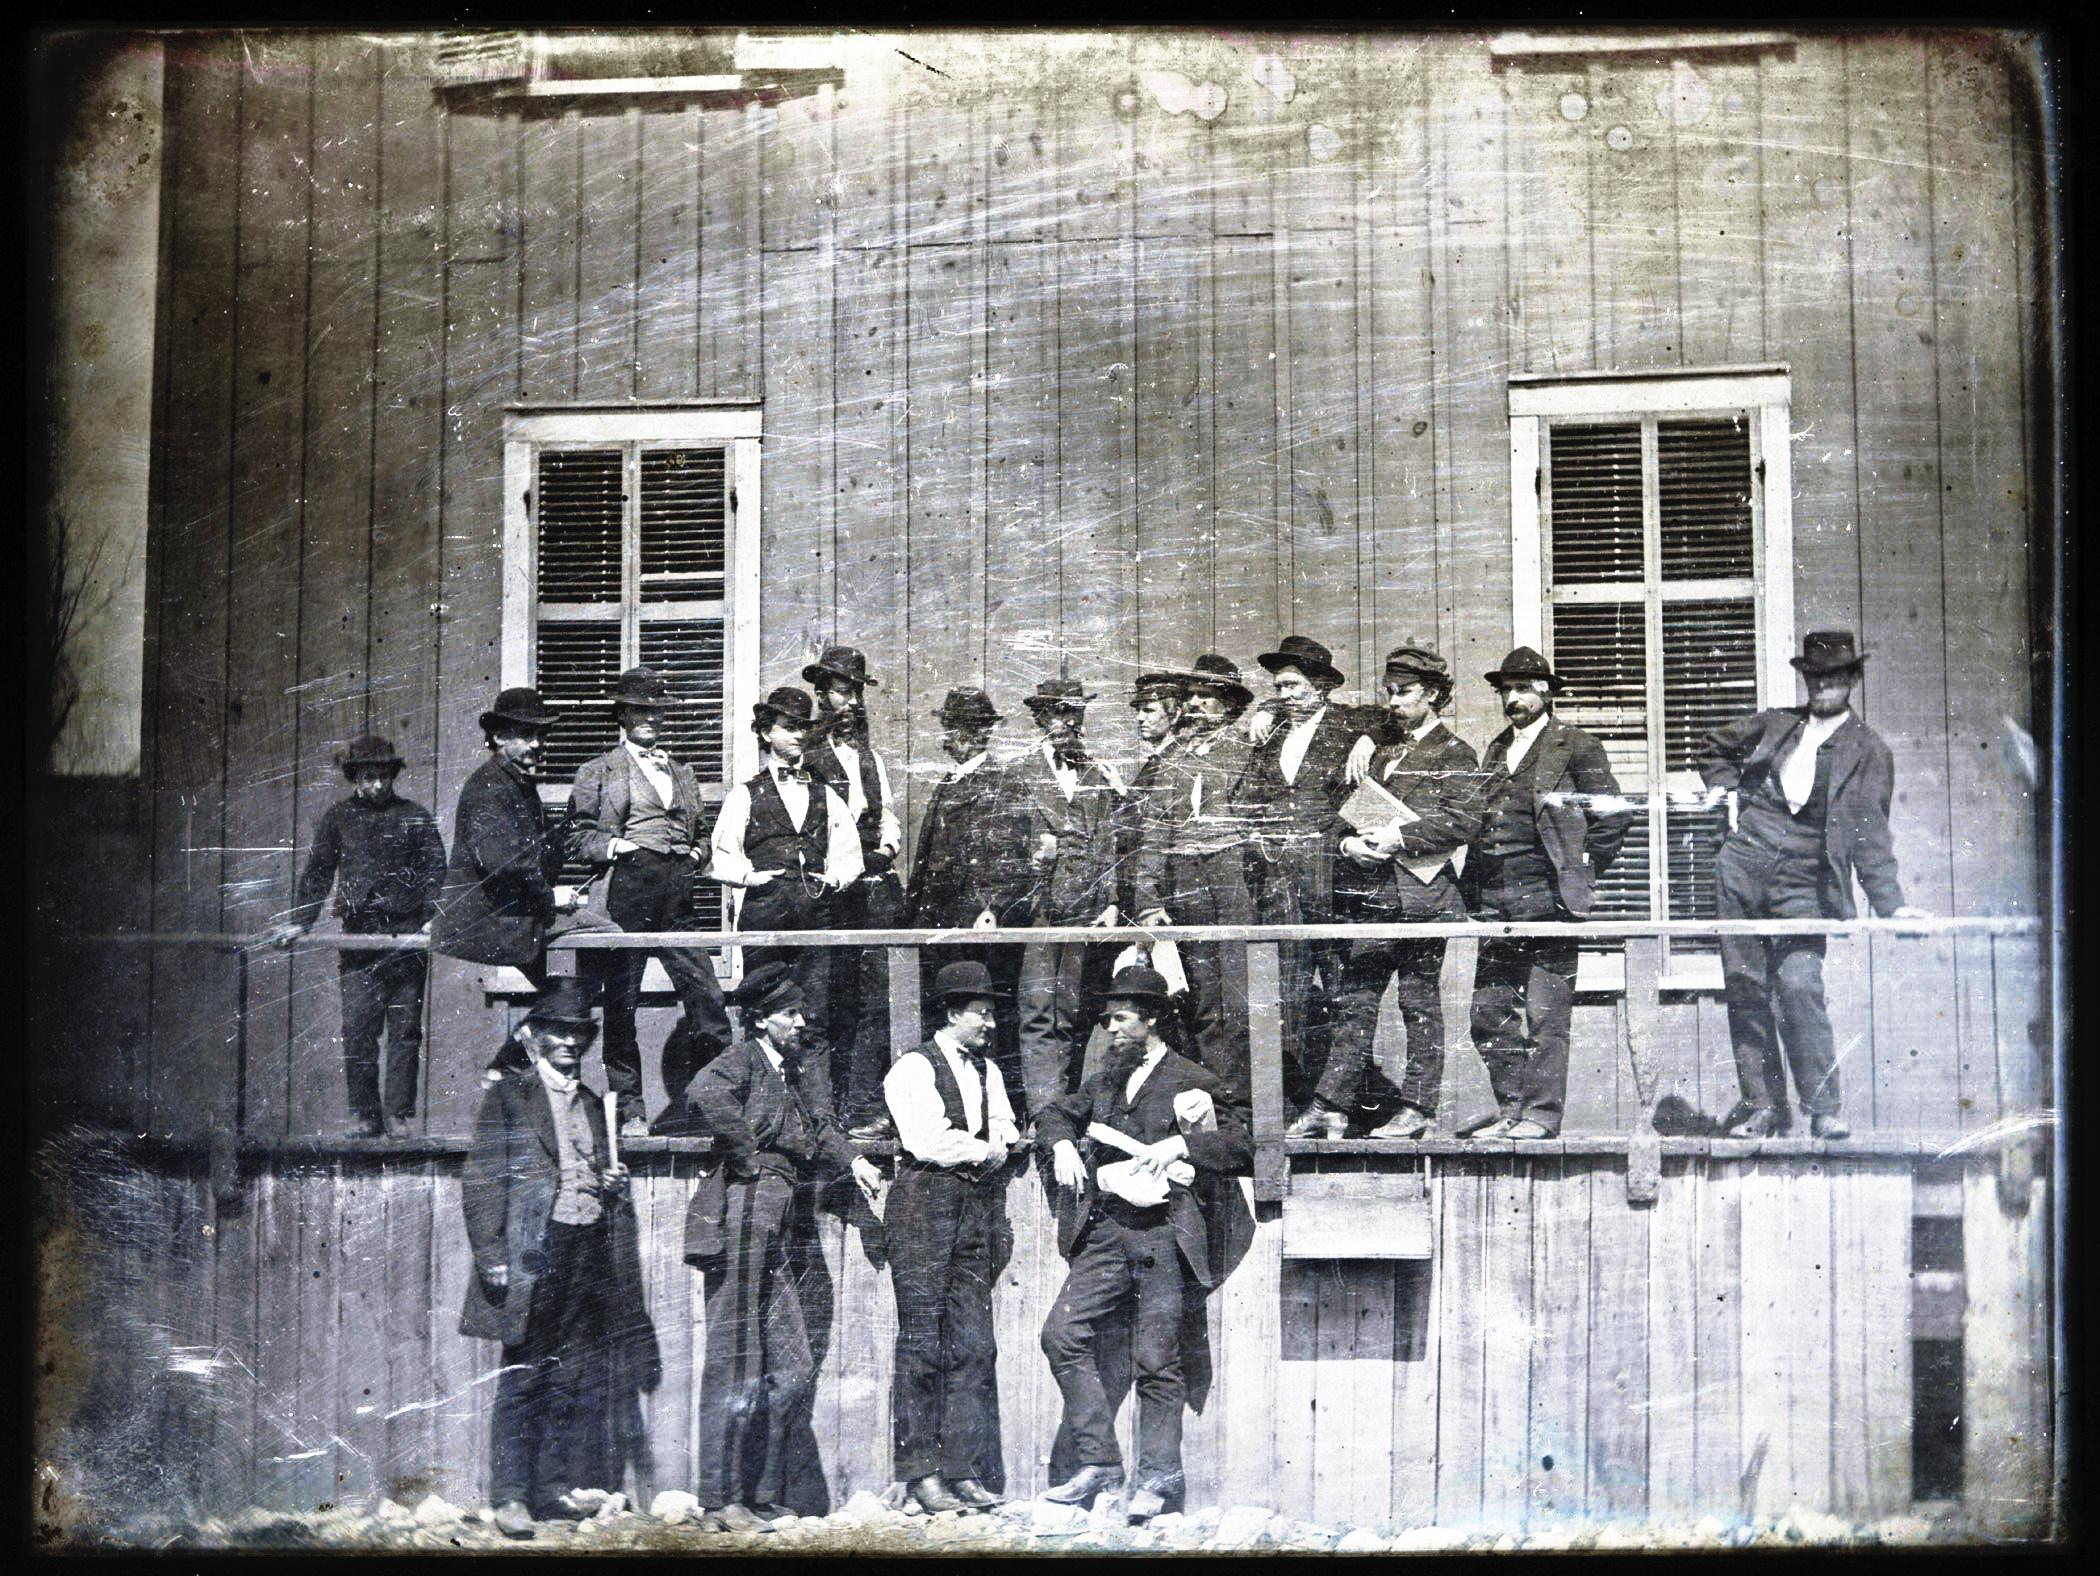 A group of men posing in front of Lynchs Slave Market, St. Louis, Missouri, 1852